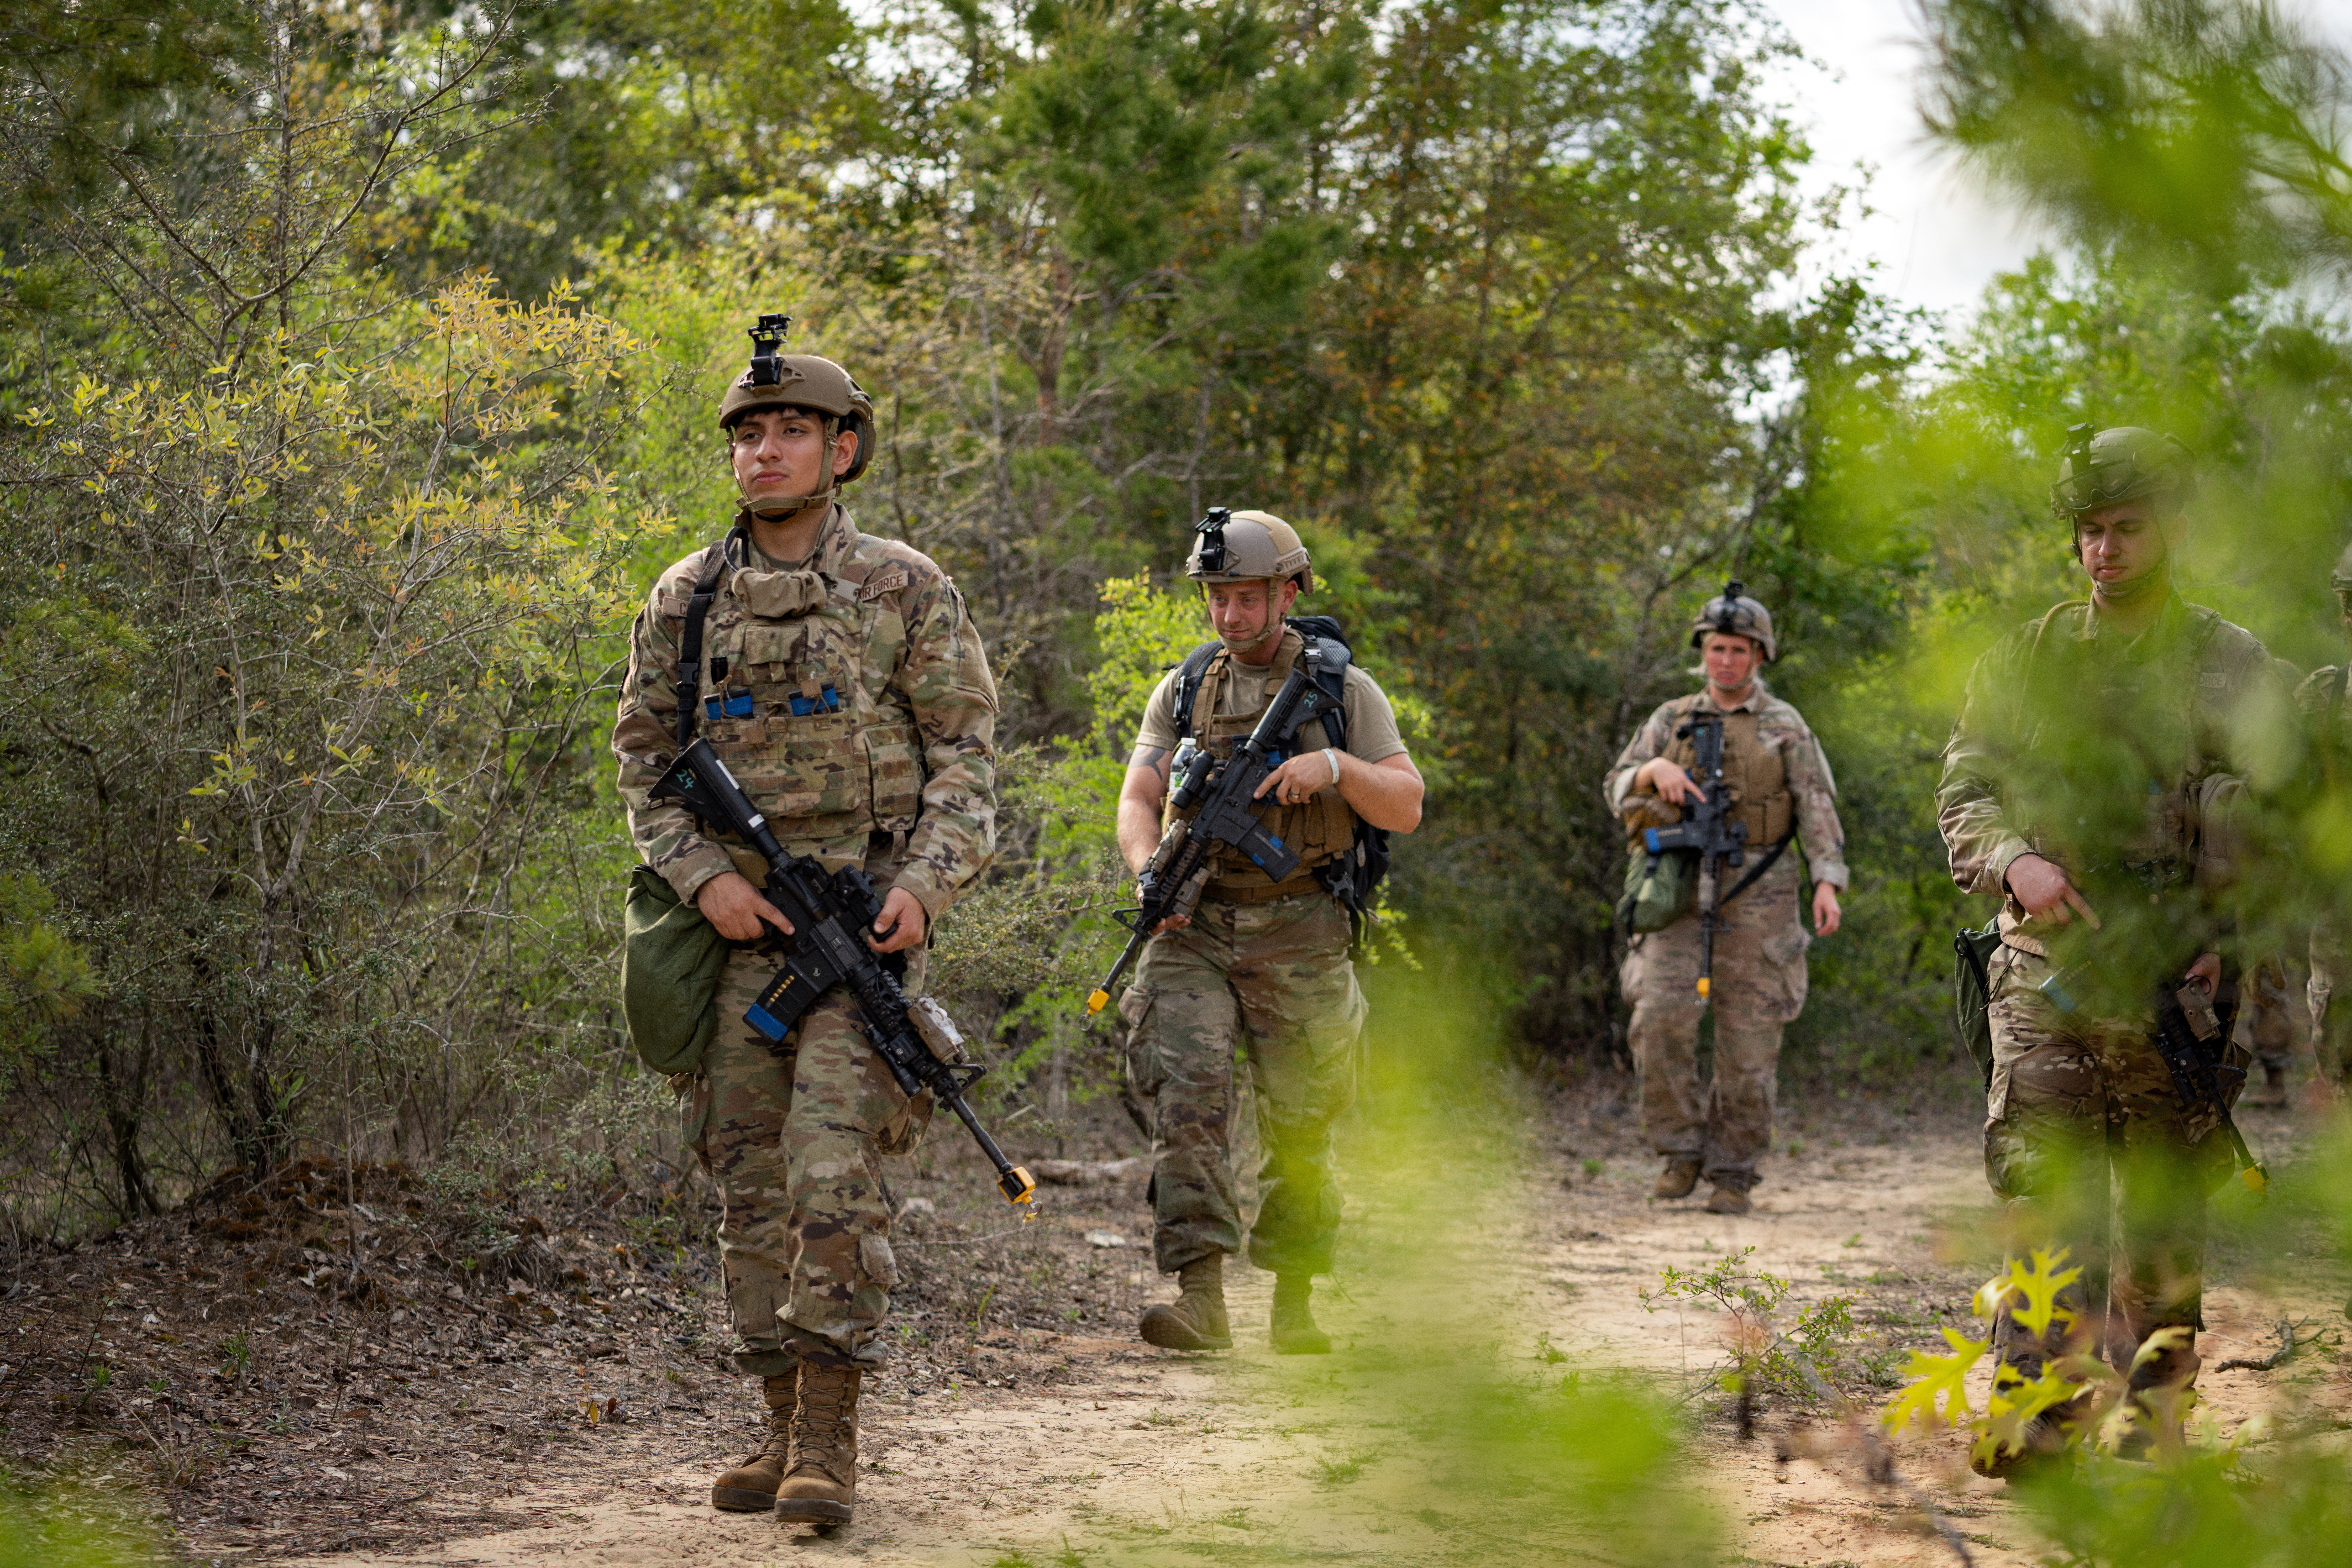 Four Airmen carrying weapons in tactical gear walk on a dirt path in the forest while spaced out in a defense formation